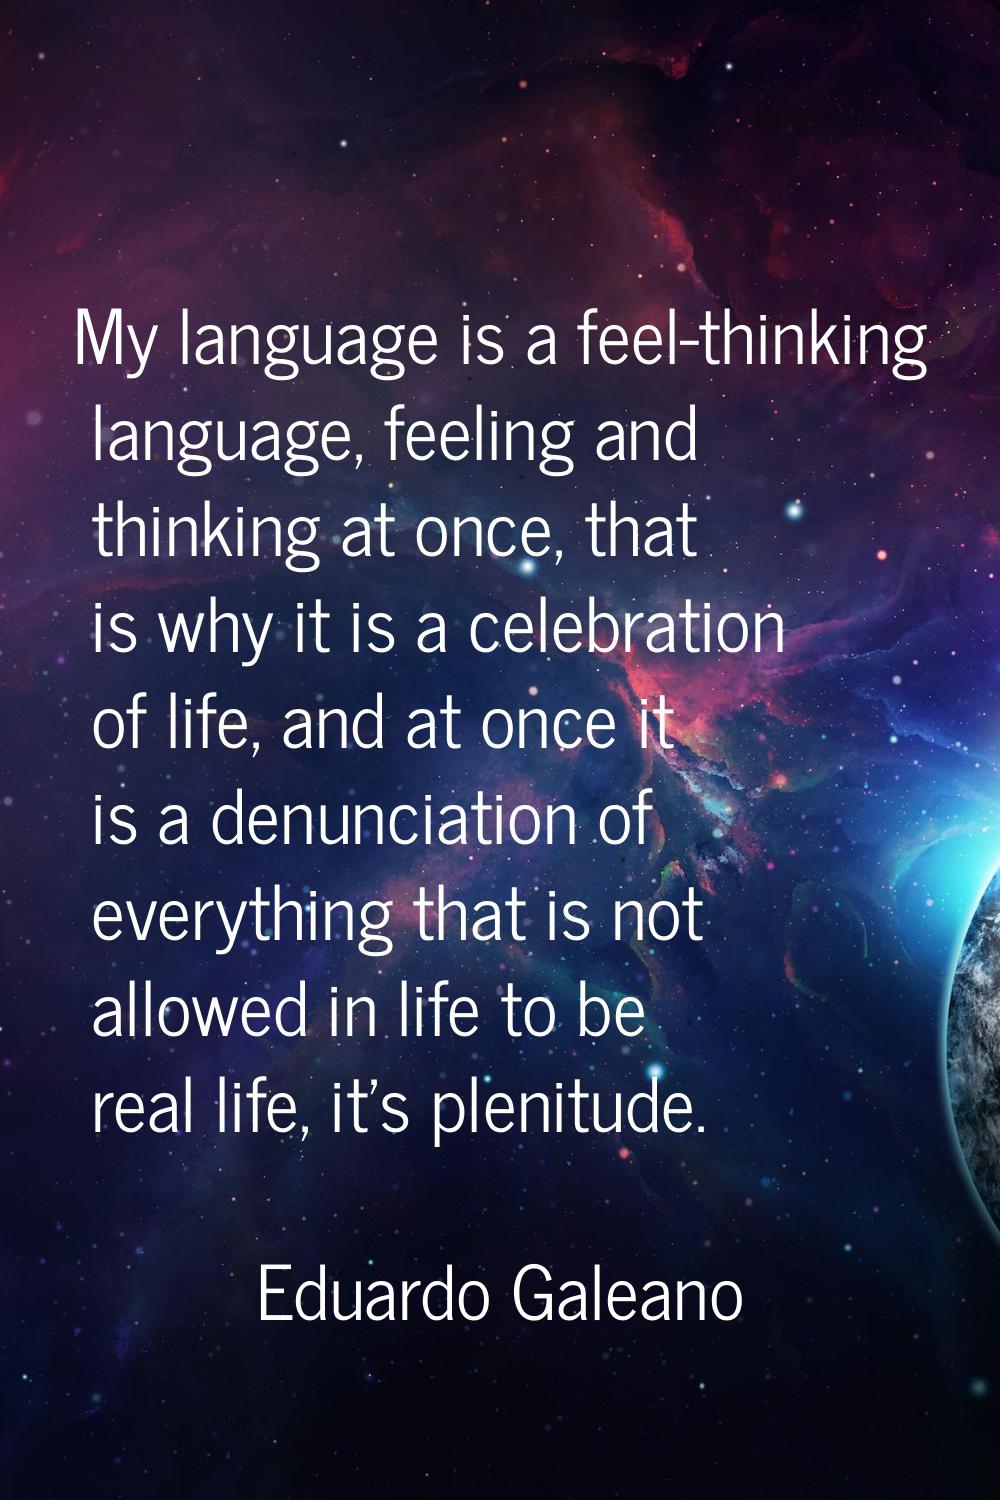 My language is a feel-thinking language, feeling and thinking at once, that is why it is a celebrat